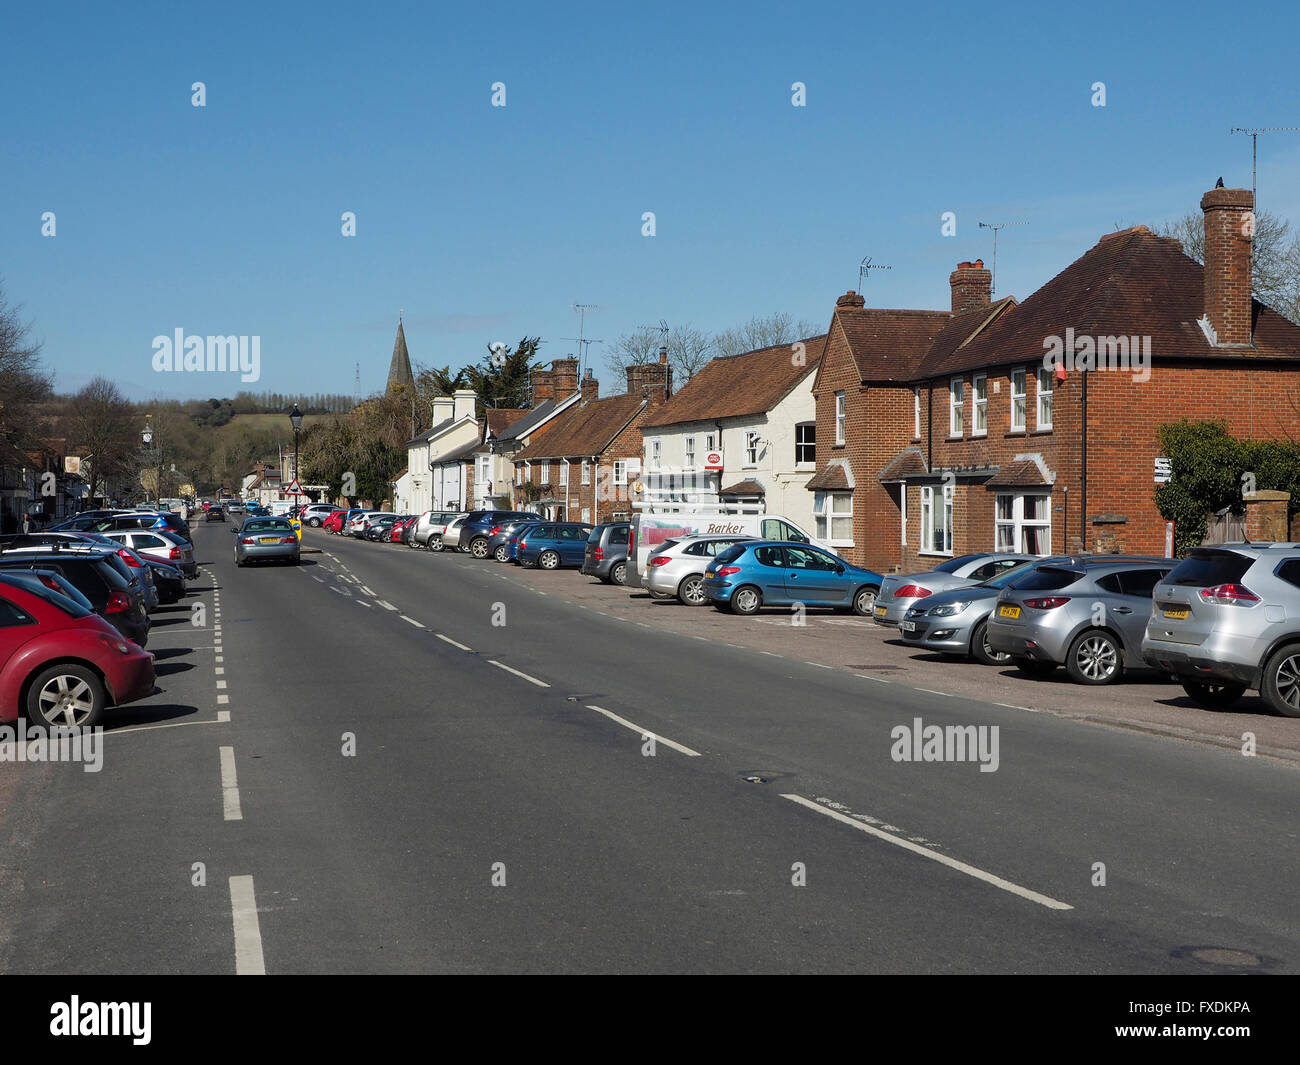 Looking north along the High Street of the pretty Test valley town of Stockbridge in Hampshire. Stock Photo